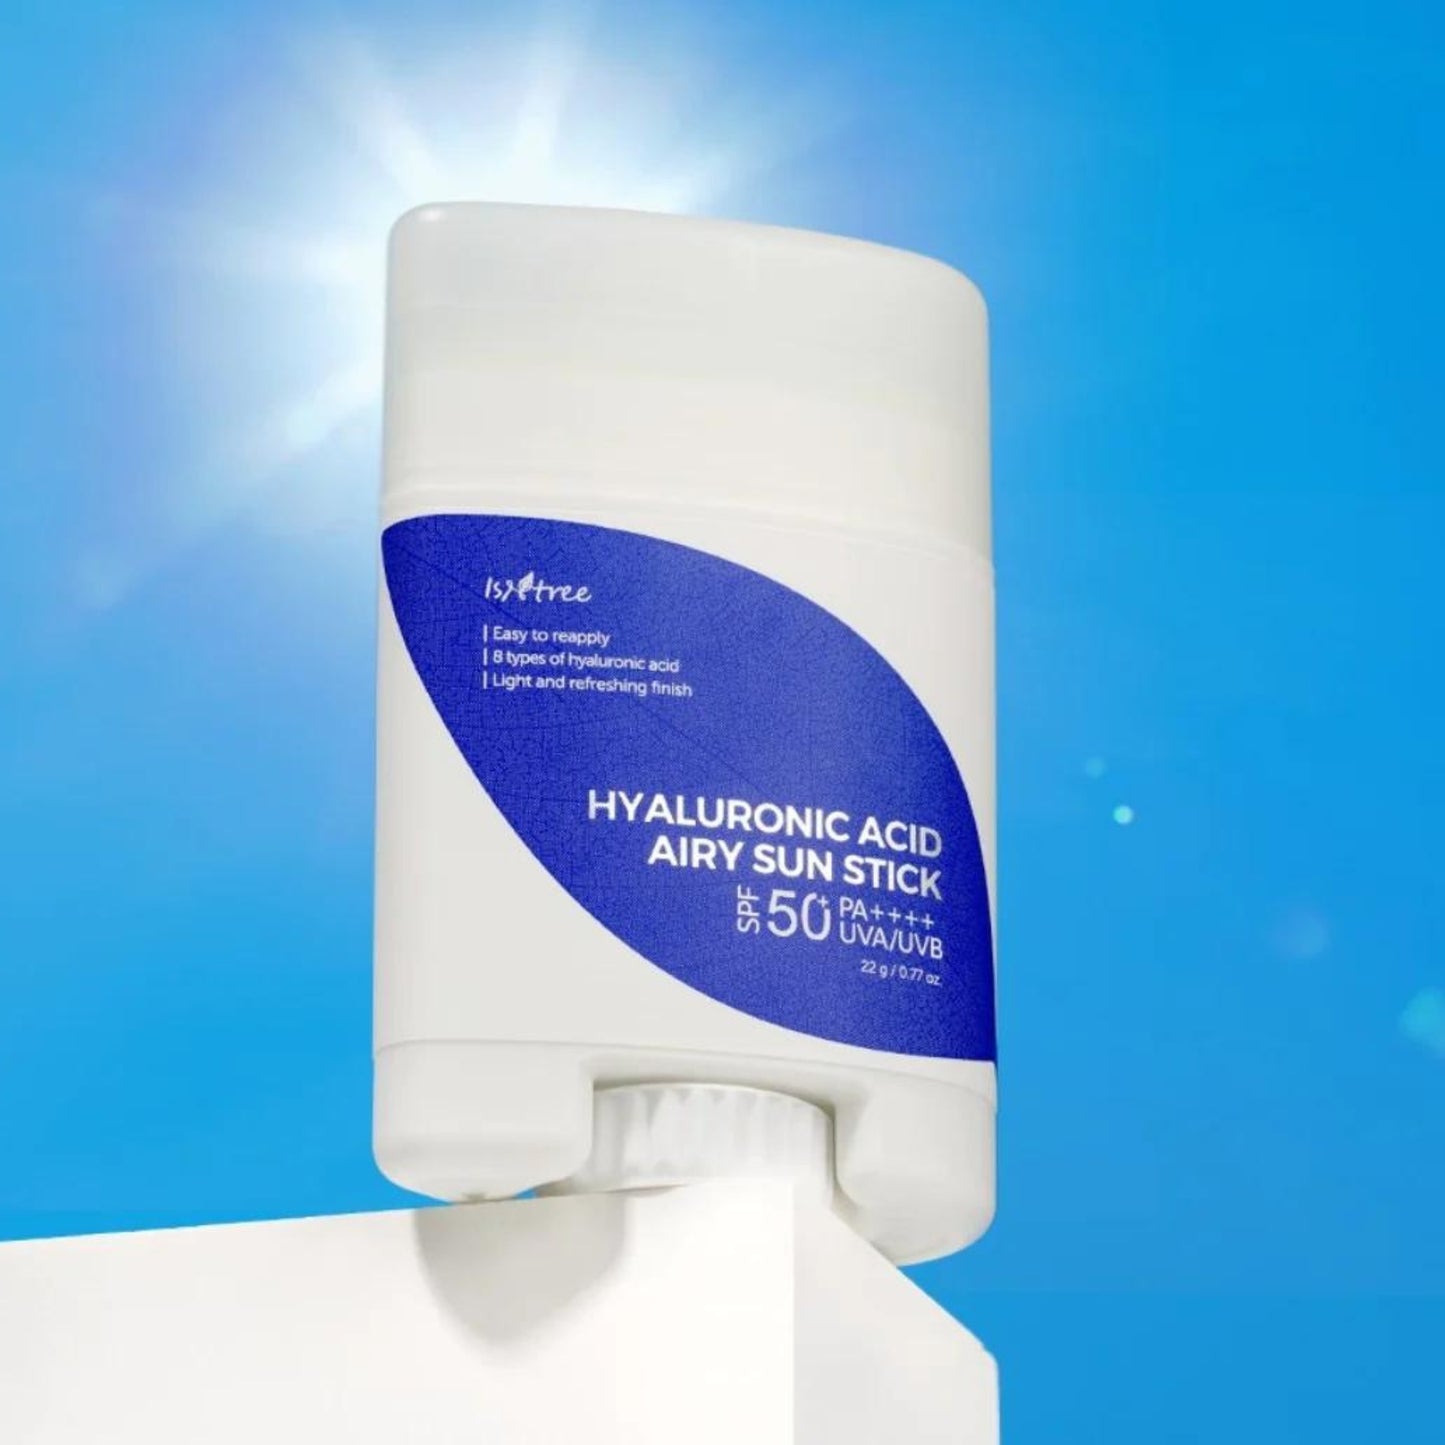 ISNTREE Hyaluronic Acid Airy Sun Stick